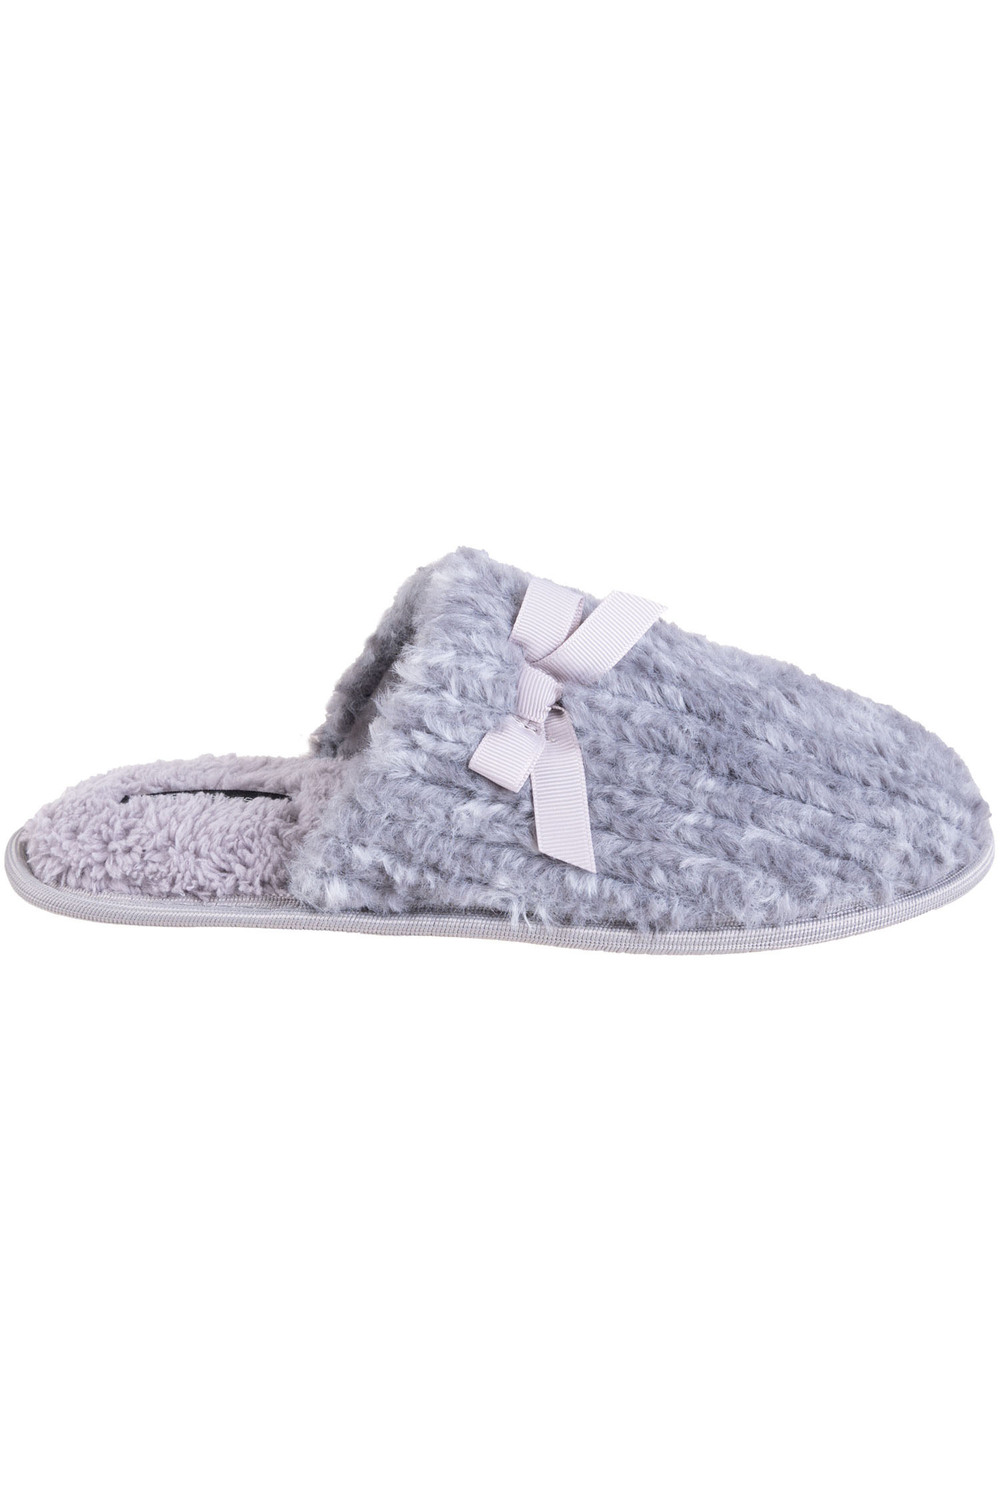 Faux fur slippers with bow detail, grey, medium (M)